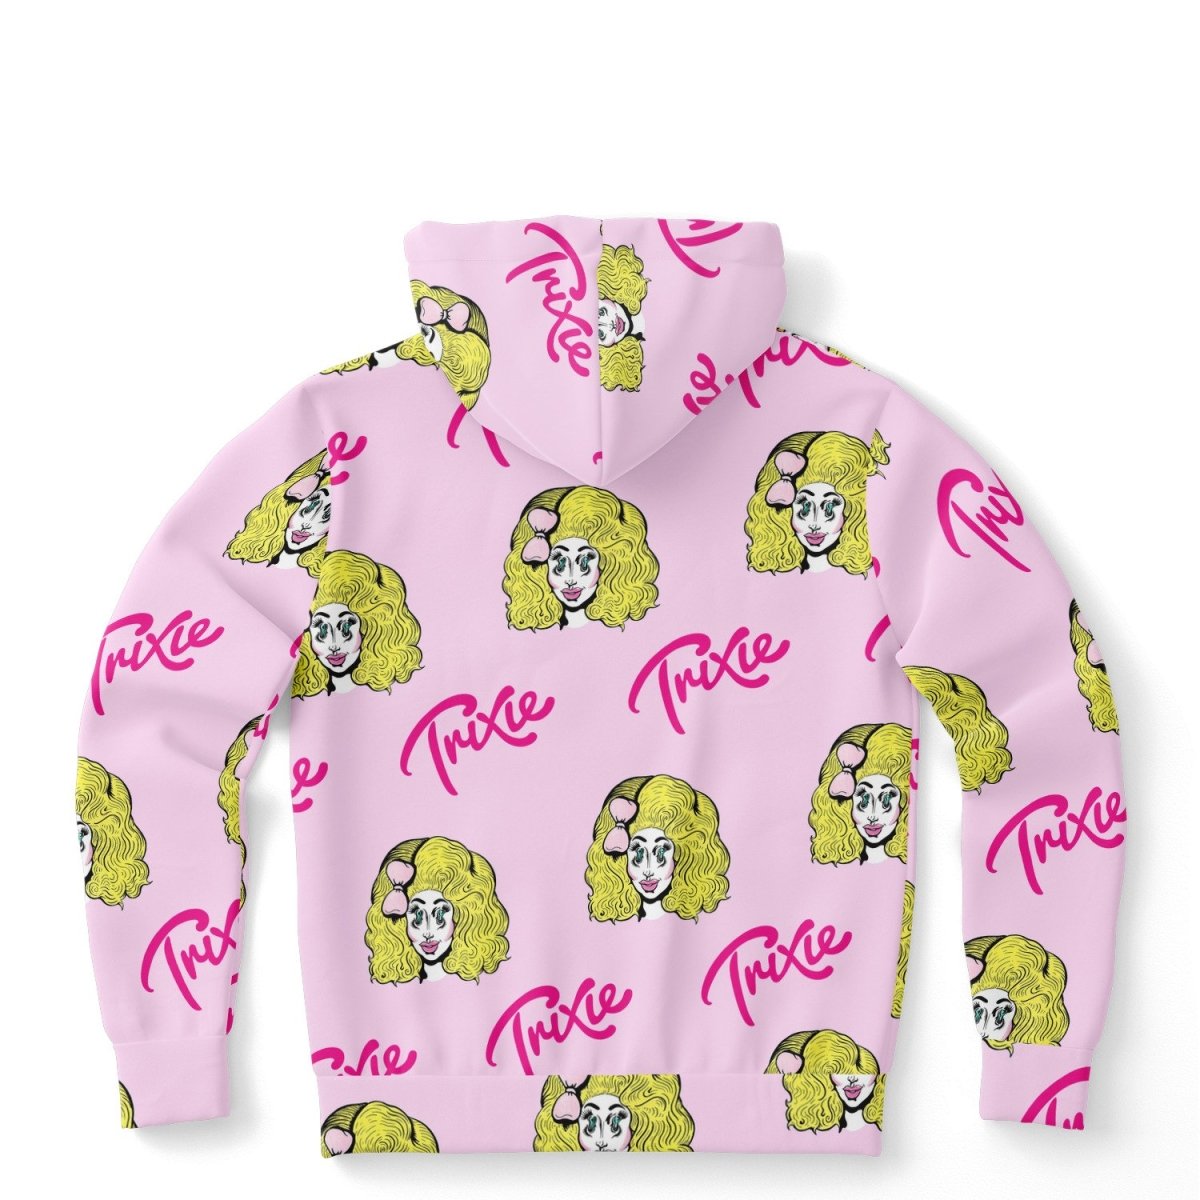 Trixie Mattel Duel Logo All Over Print Hoodie - dragqueenmerch